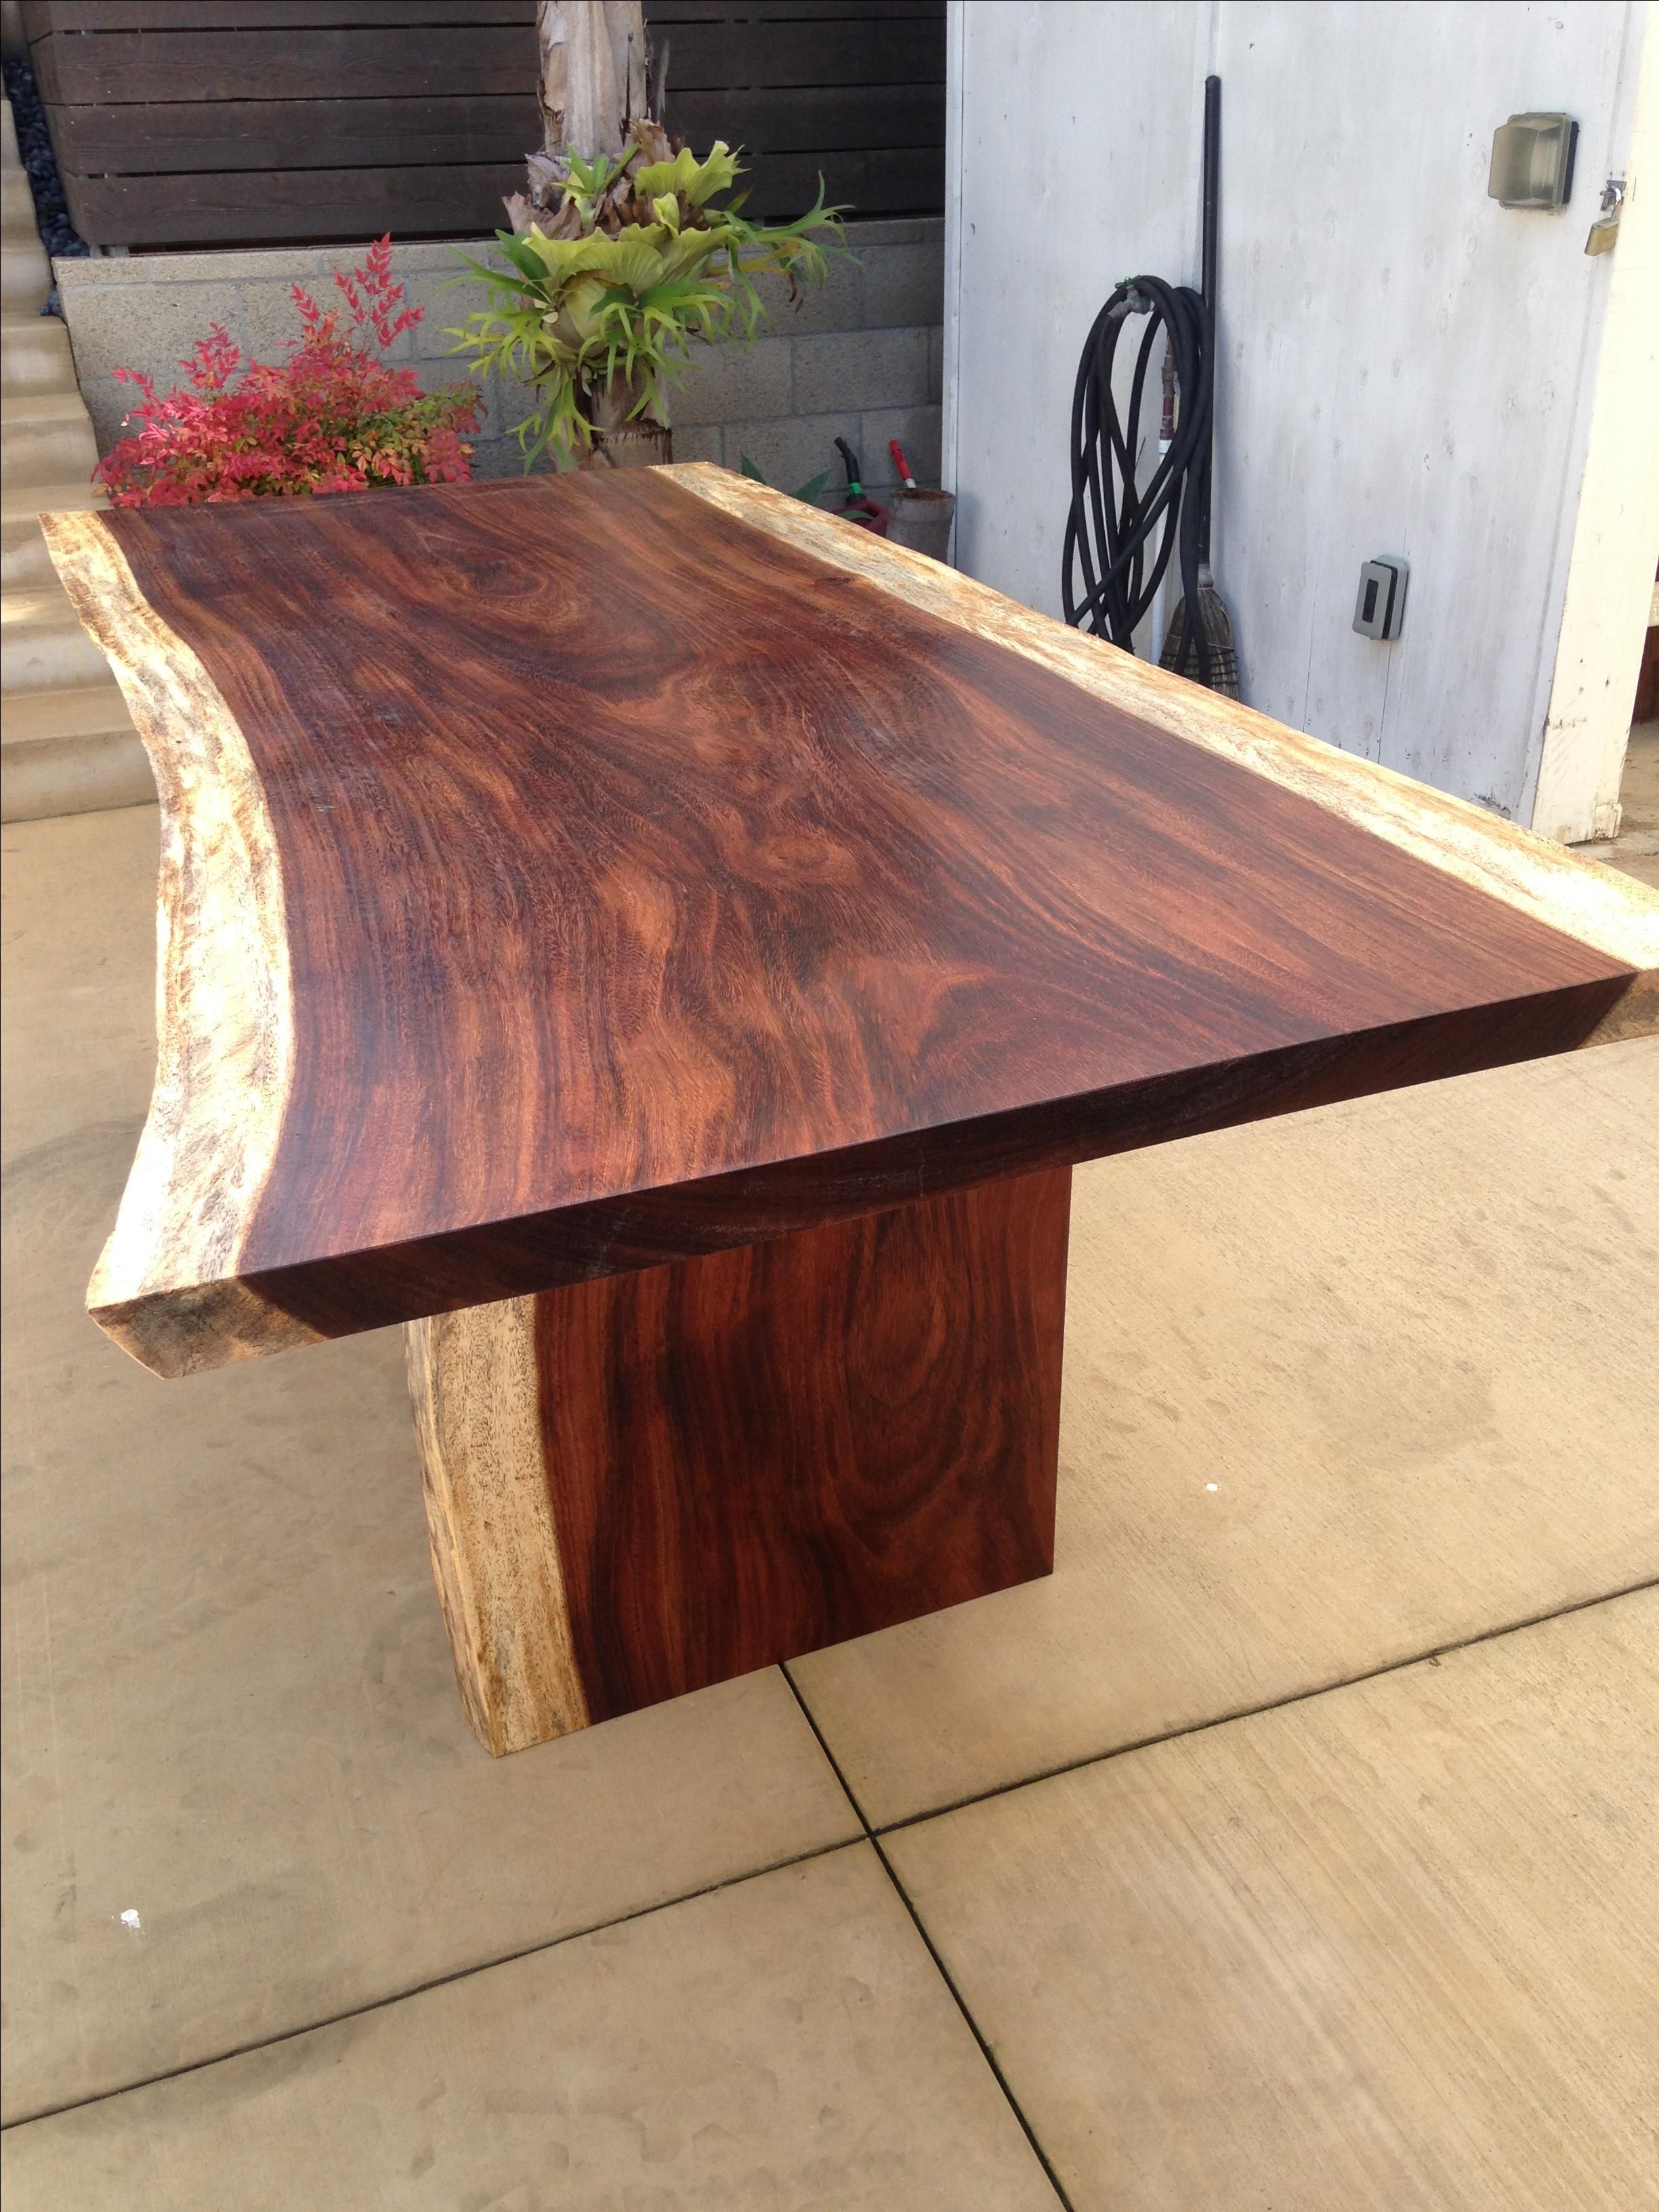 Teak Slab Dining Table: A Unique Piece For Your Dining Room